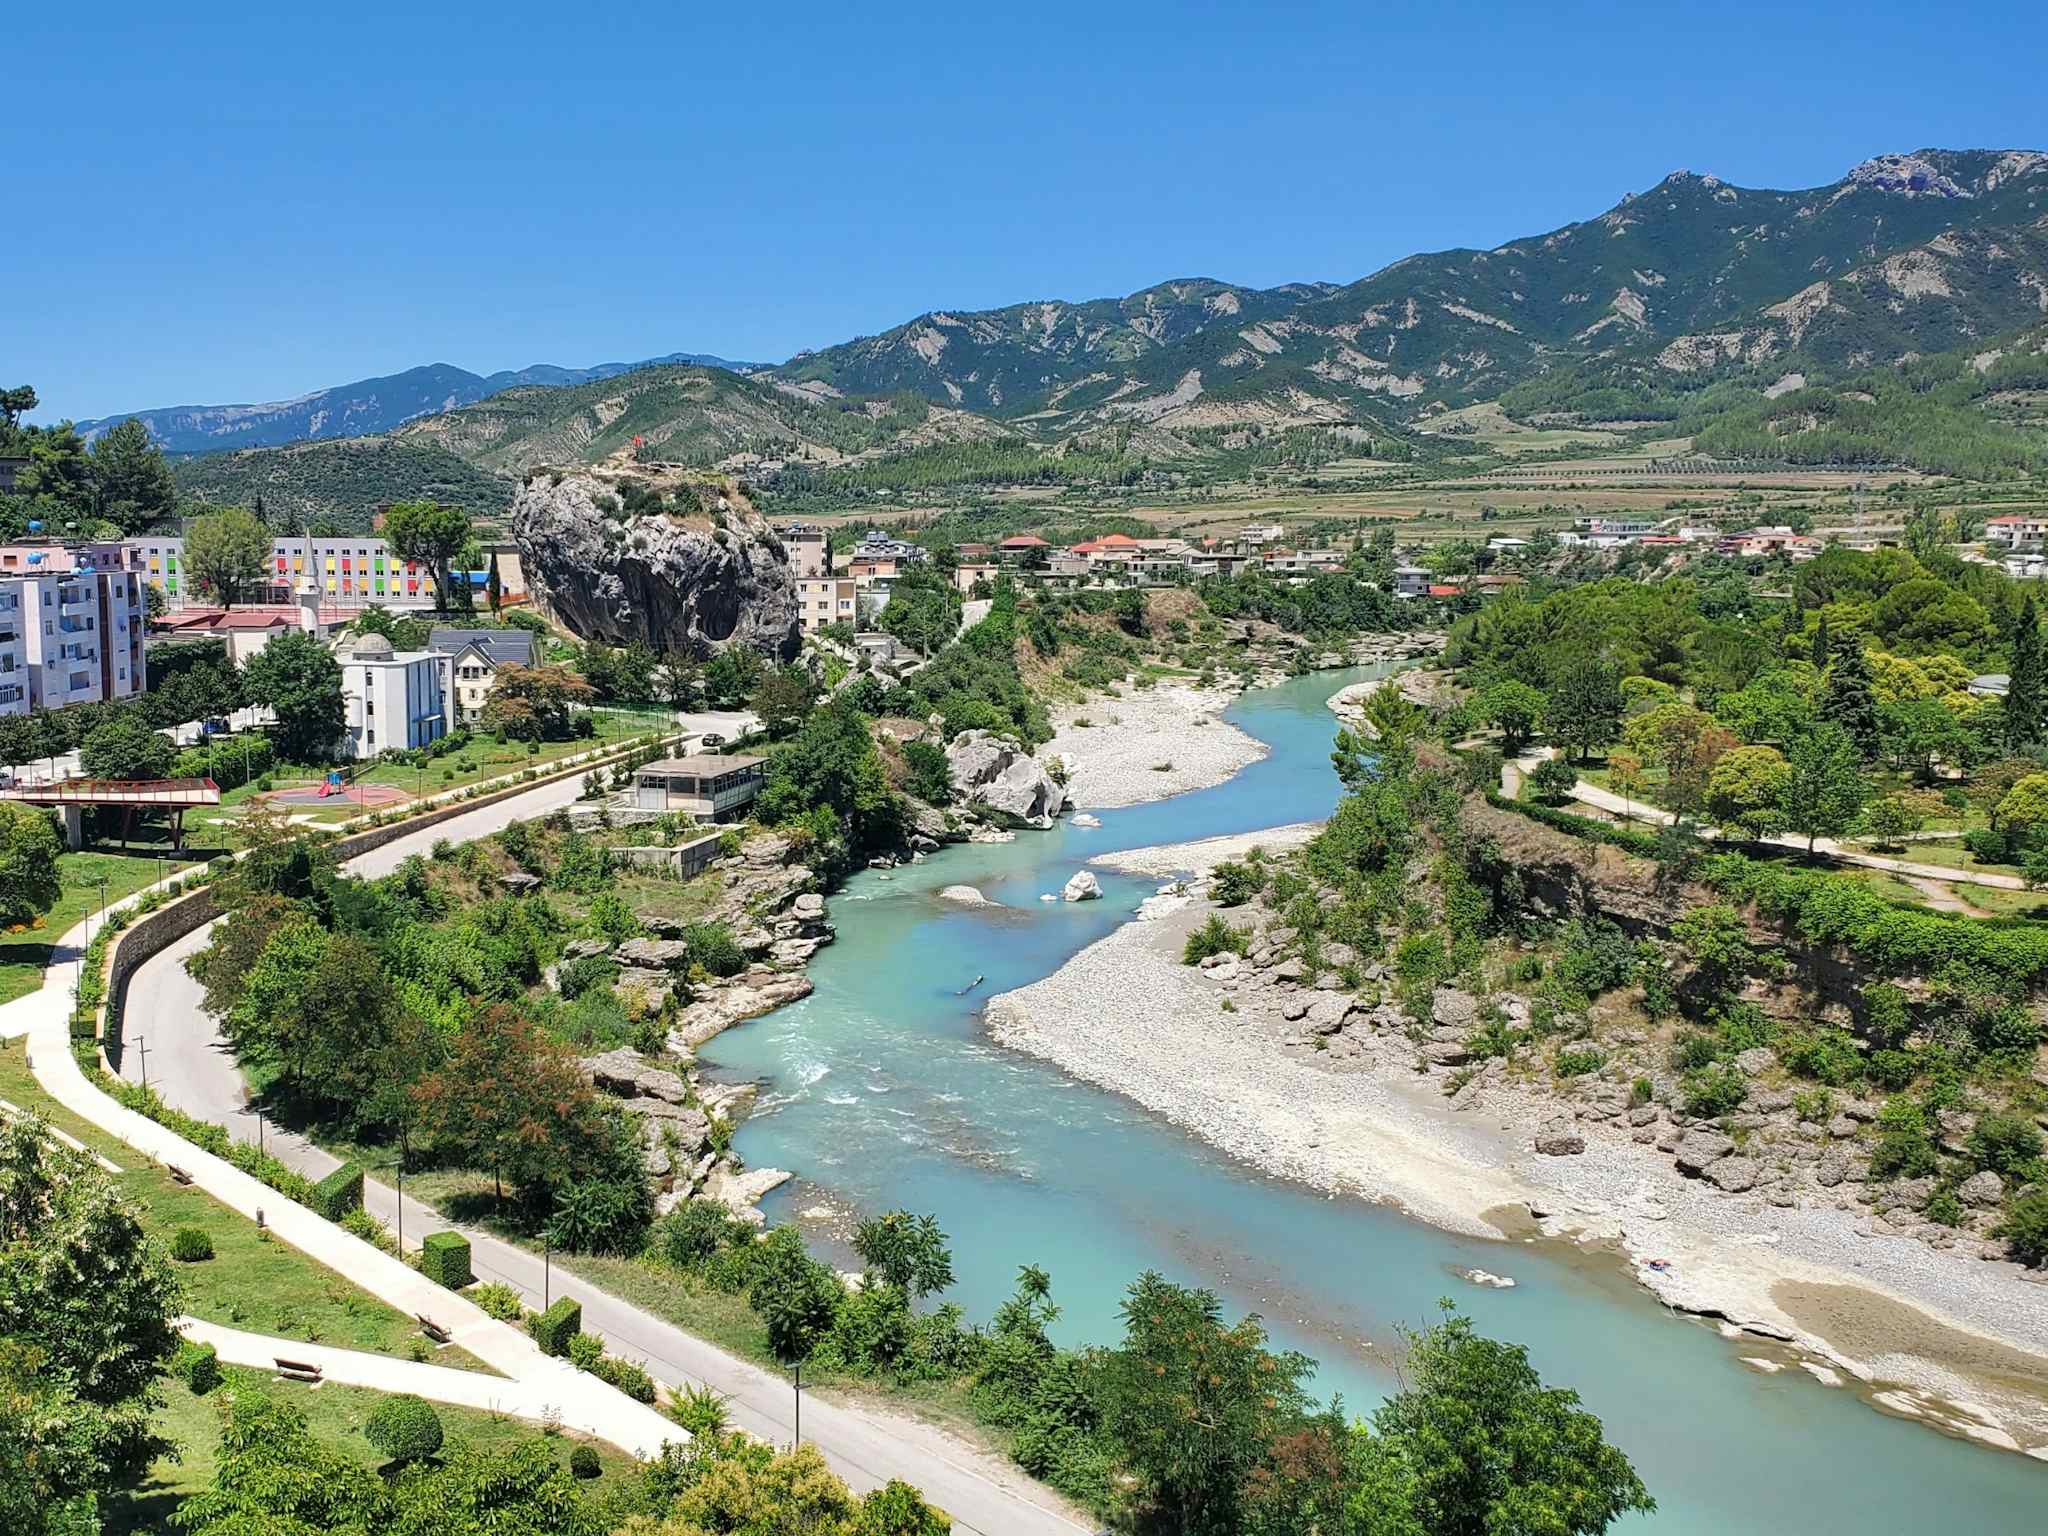 Hotel Permet on the banks of the Vjosa River, Albania